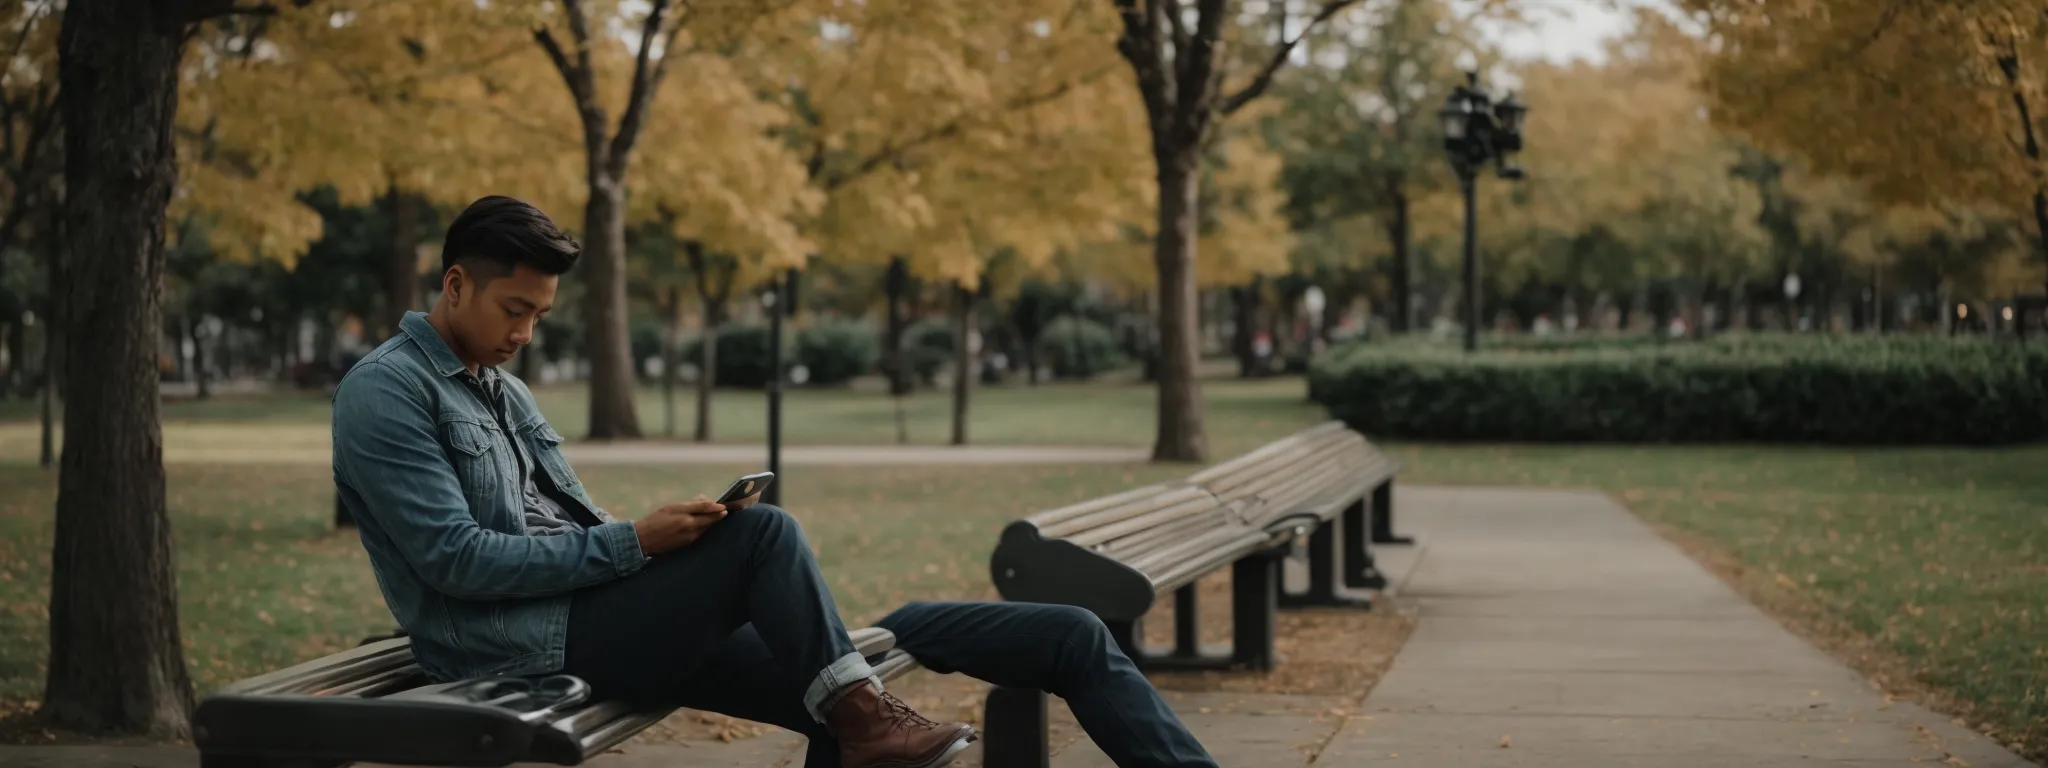 a person using a smartphone to effortlessly navigate a smoothly responsive website while sitting on a park bench.